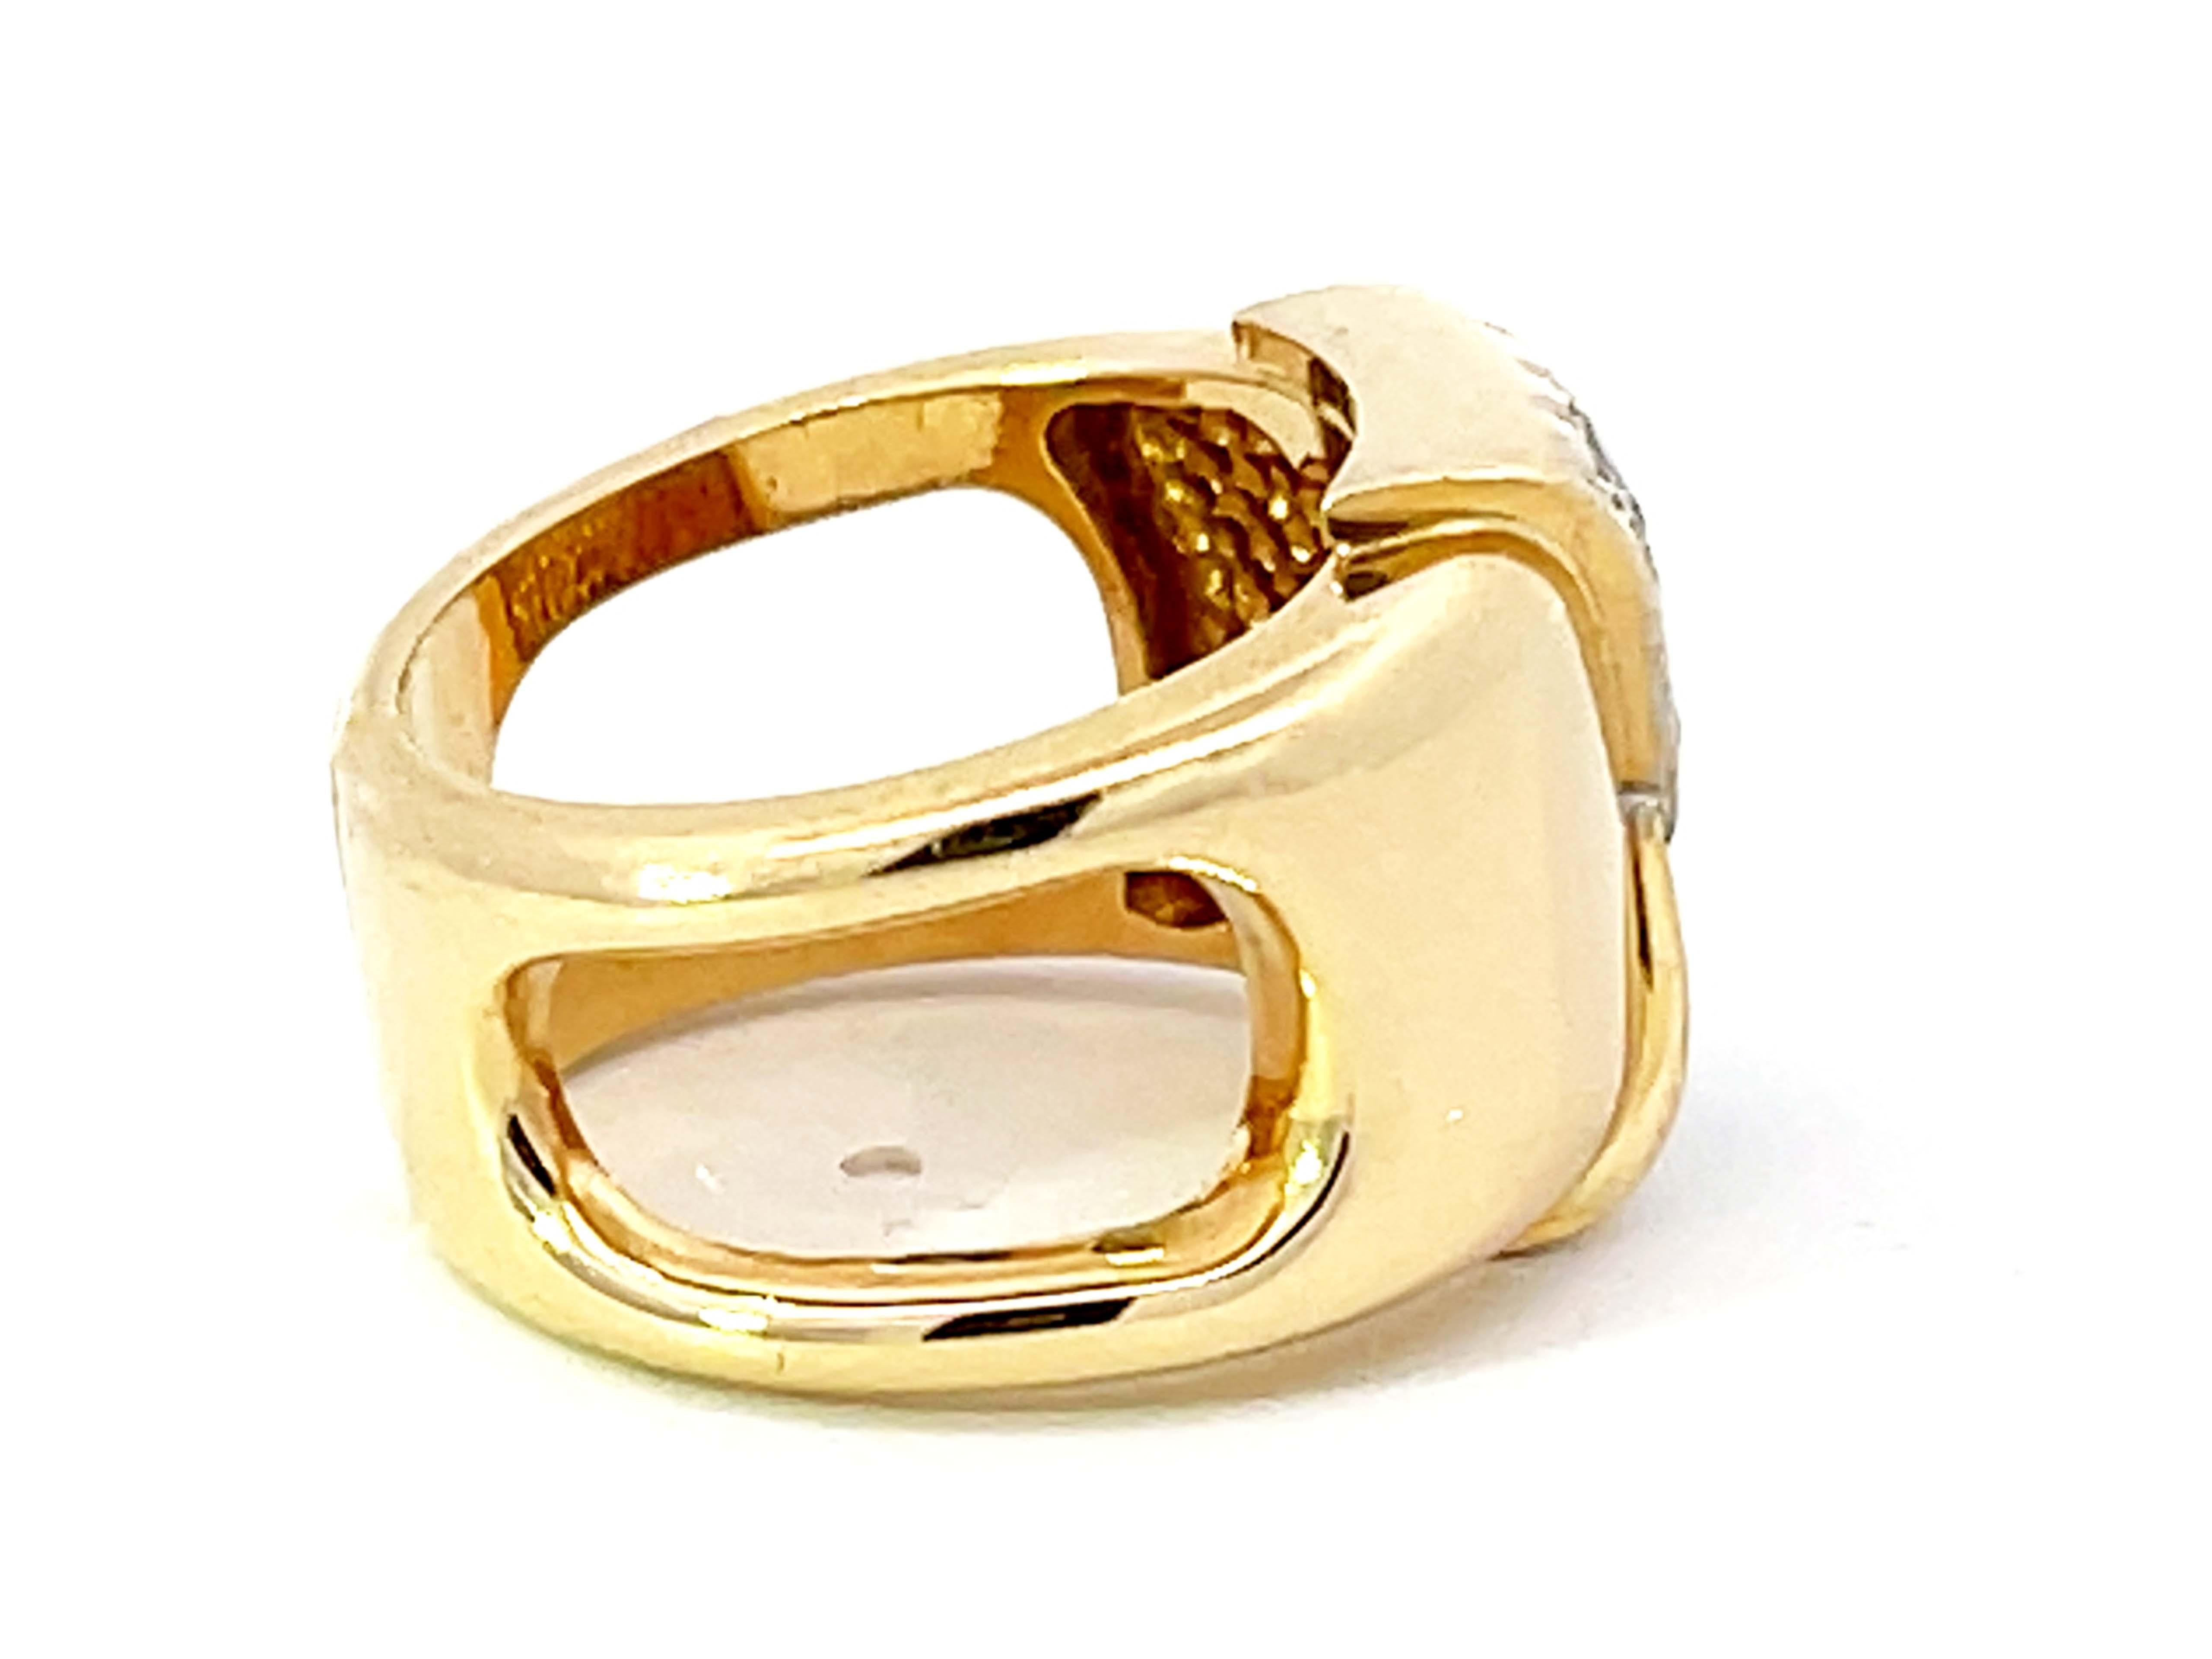 Wide Band Diamond Ring with Cutout Shoulders in 18k Yellow Gold In Excellent Condition For Sale In Honolulu, HI